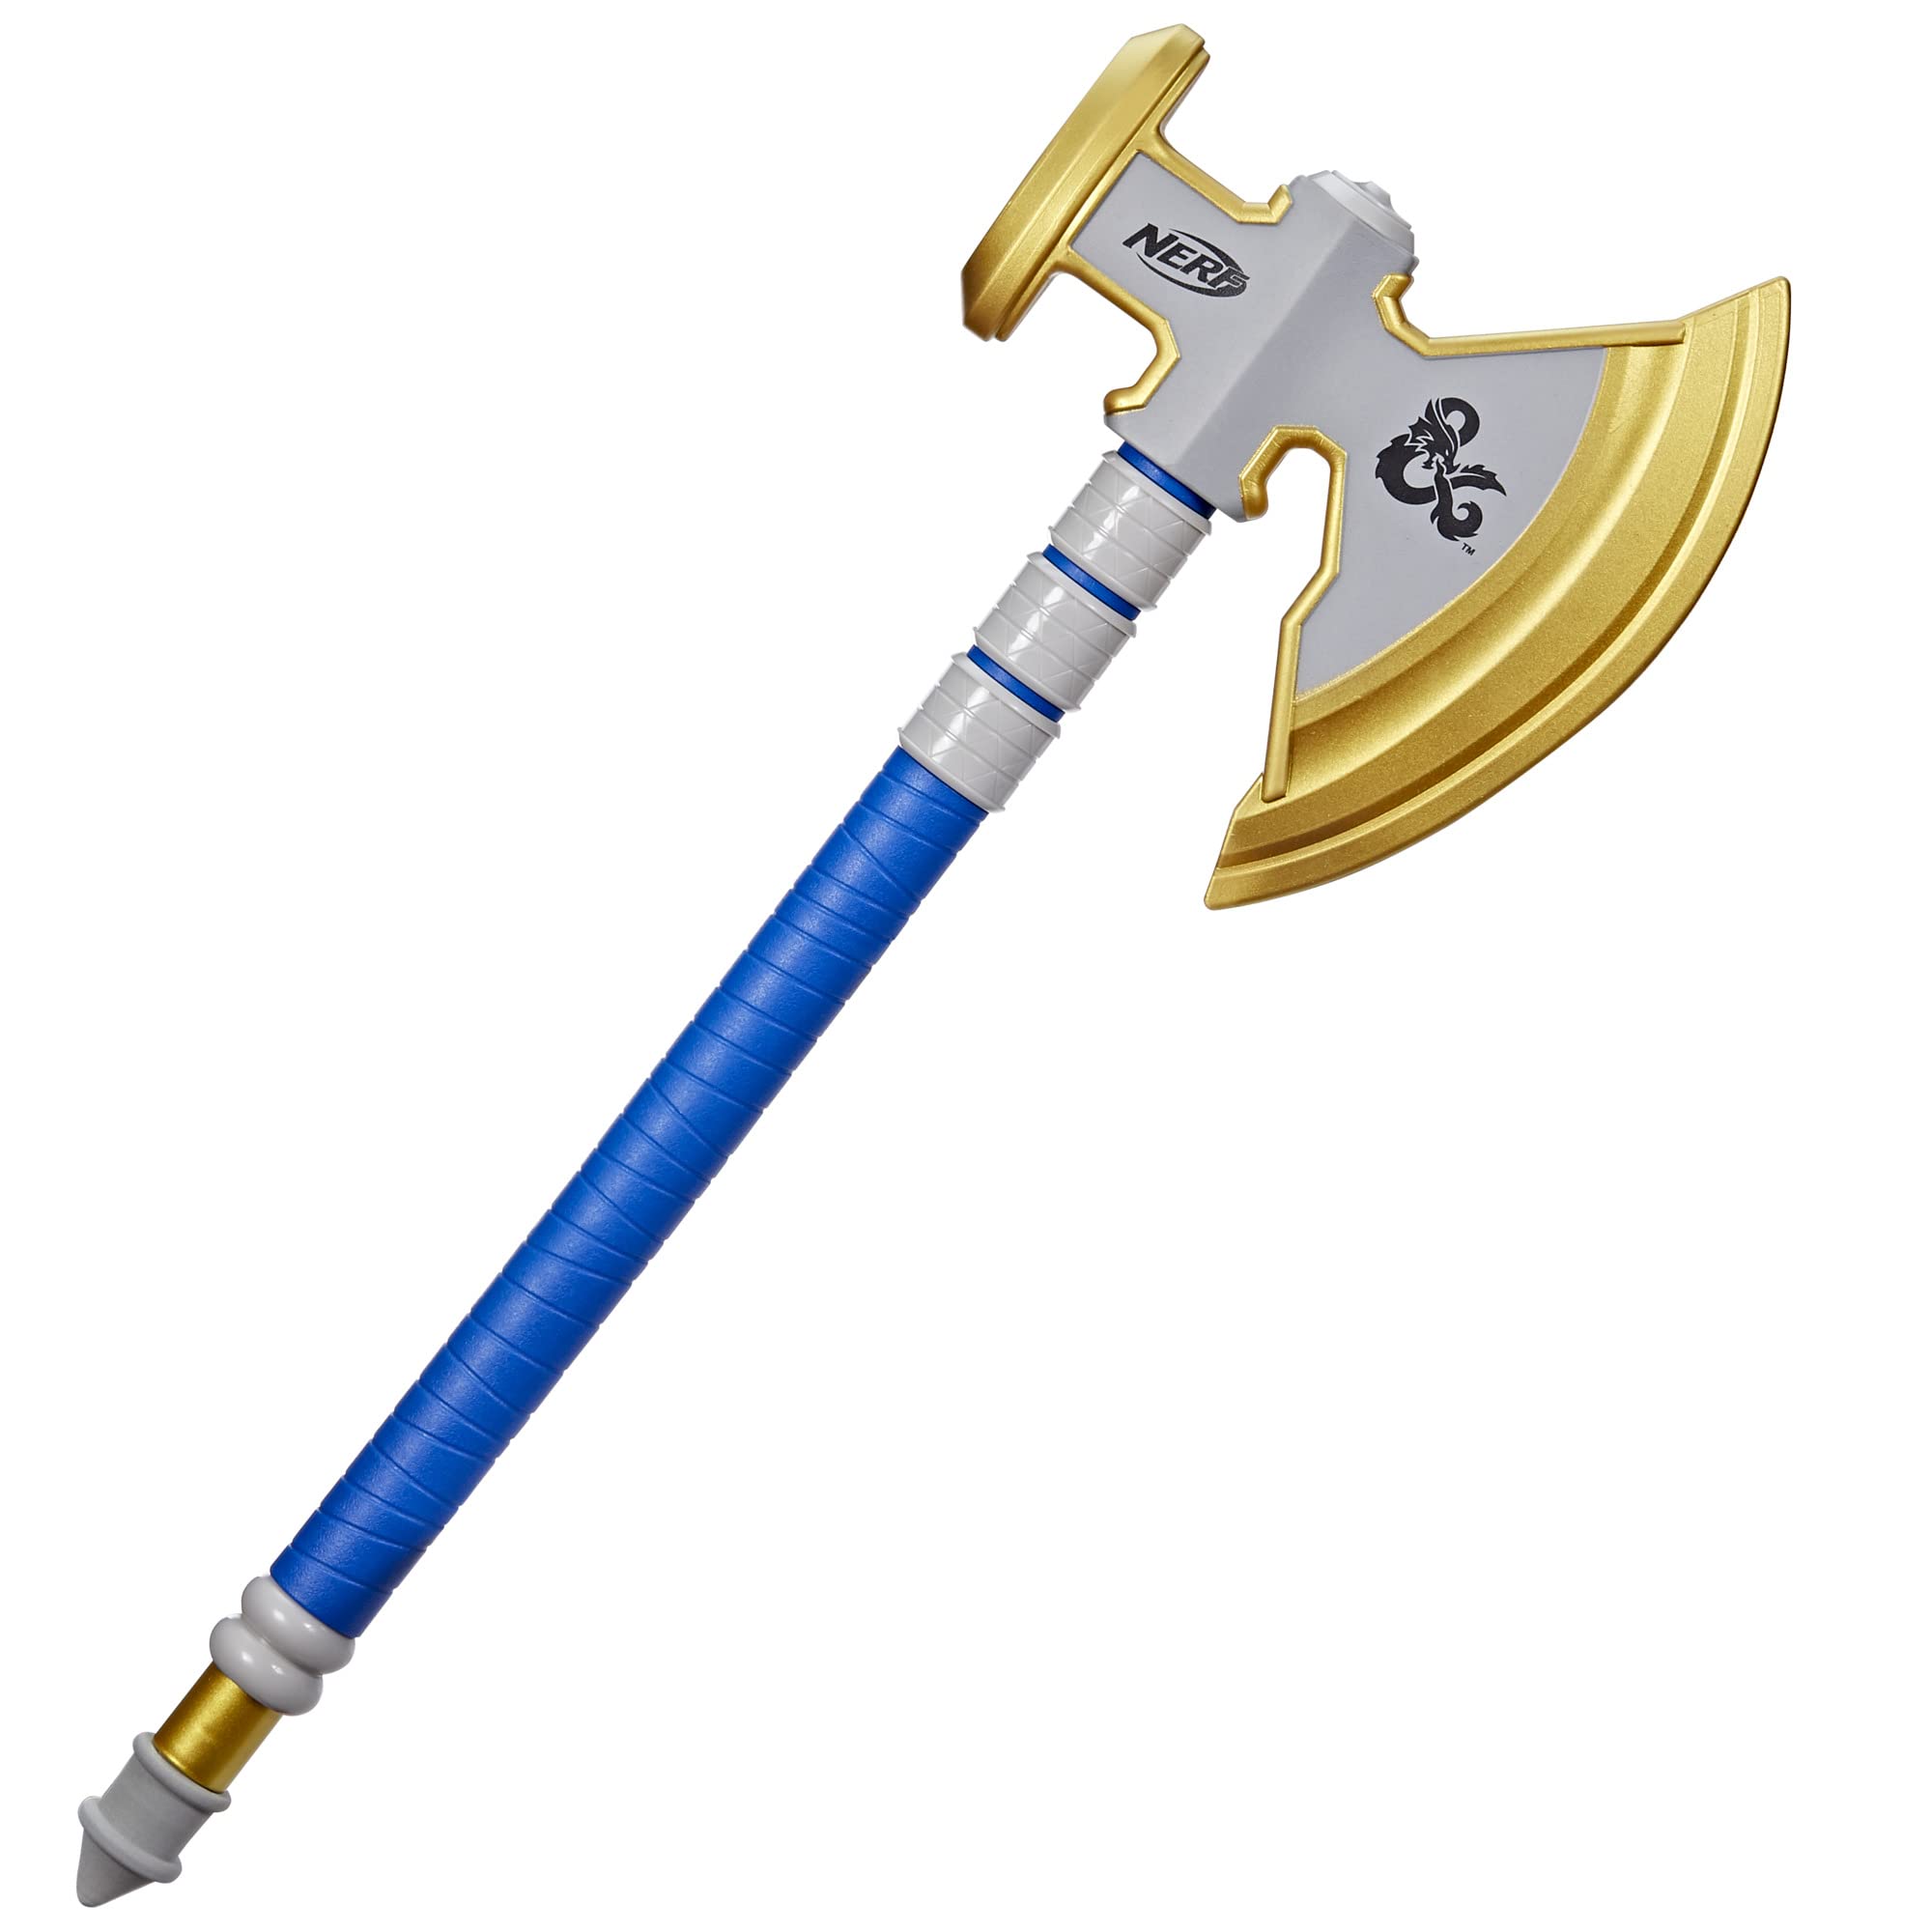 Nerf Dungeons & Dragons Holga's GreatAxe Toy $20.50 + Free Shipping w/ Prime or on $25+